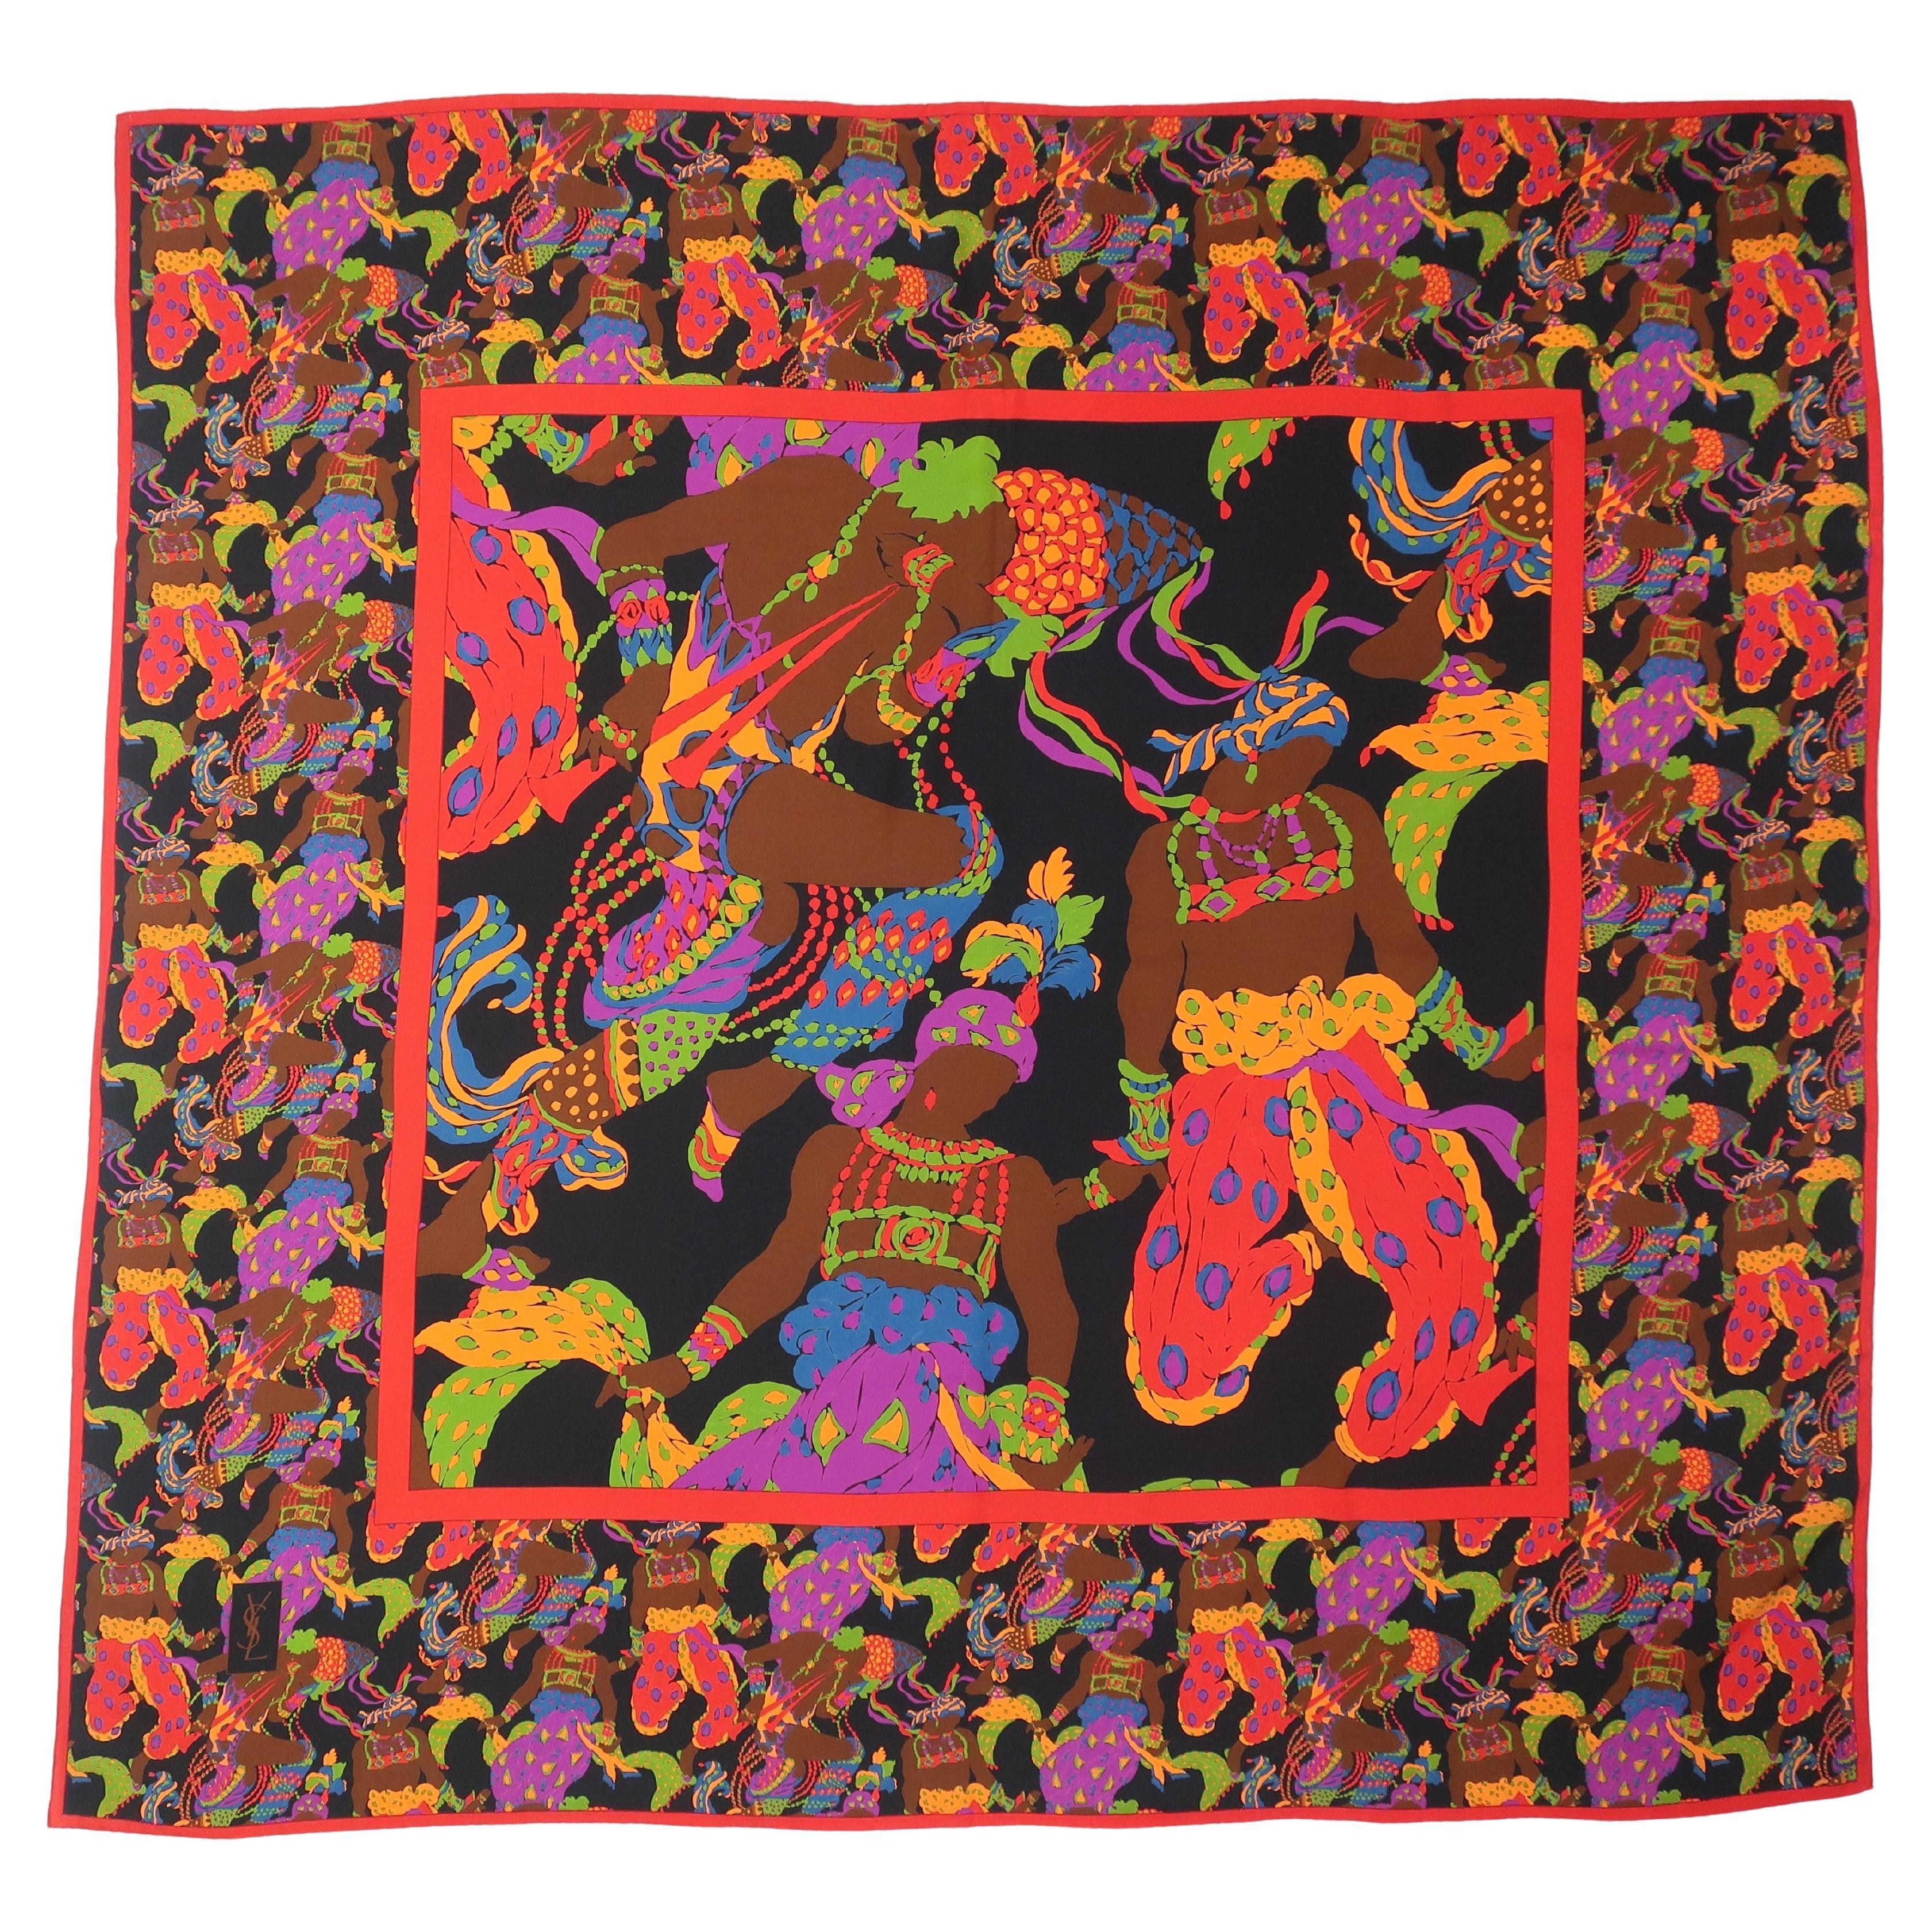 Yves Saint Laurent Moroccan Inspired Extra Large Silk Scarf Wrap, C.1990